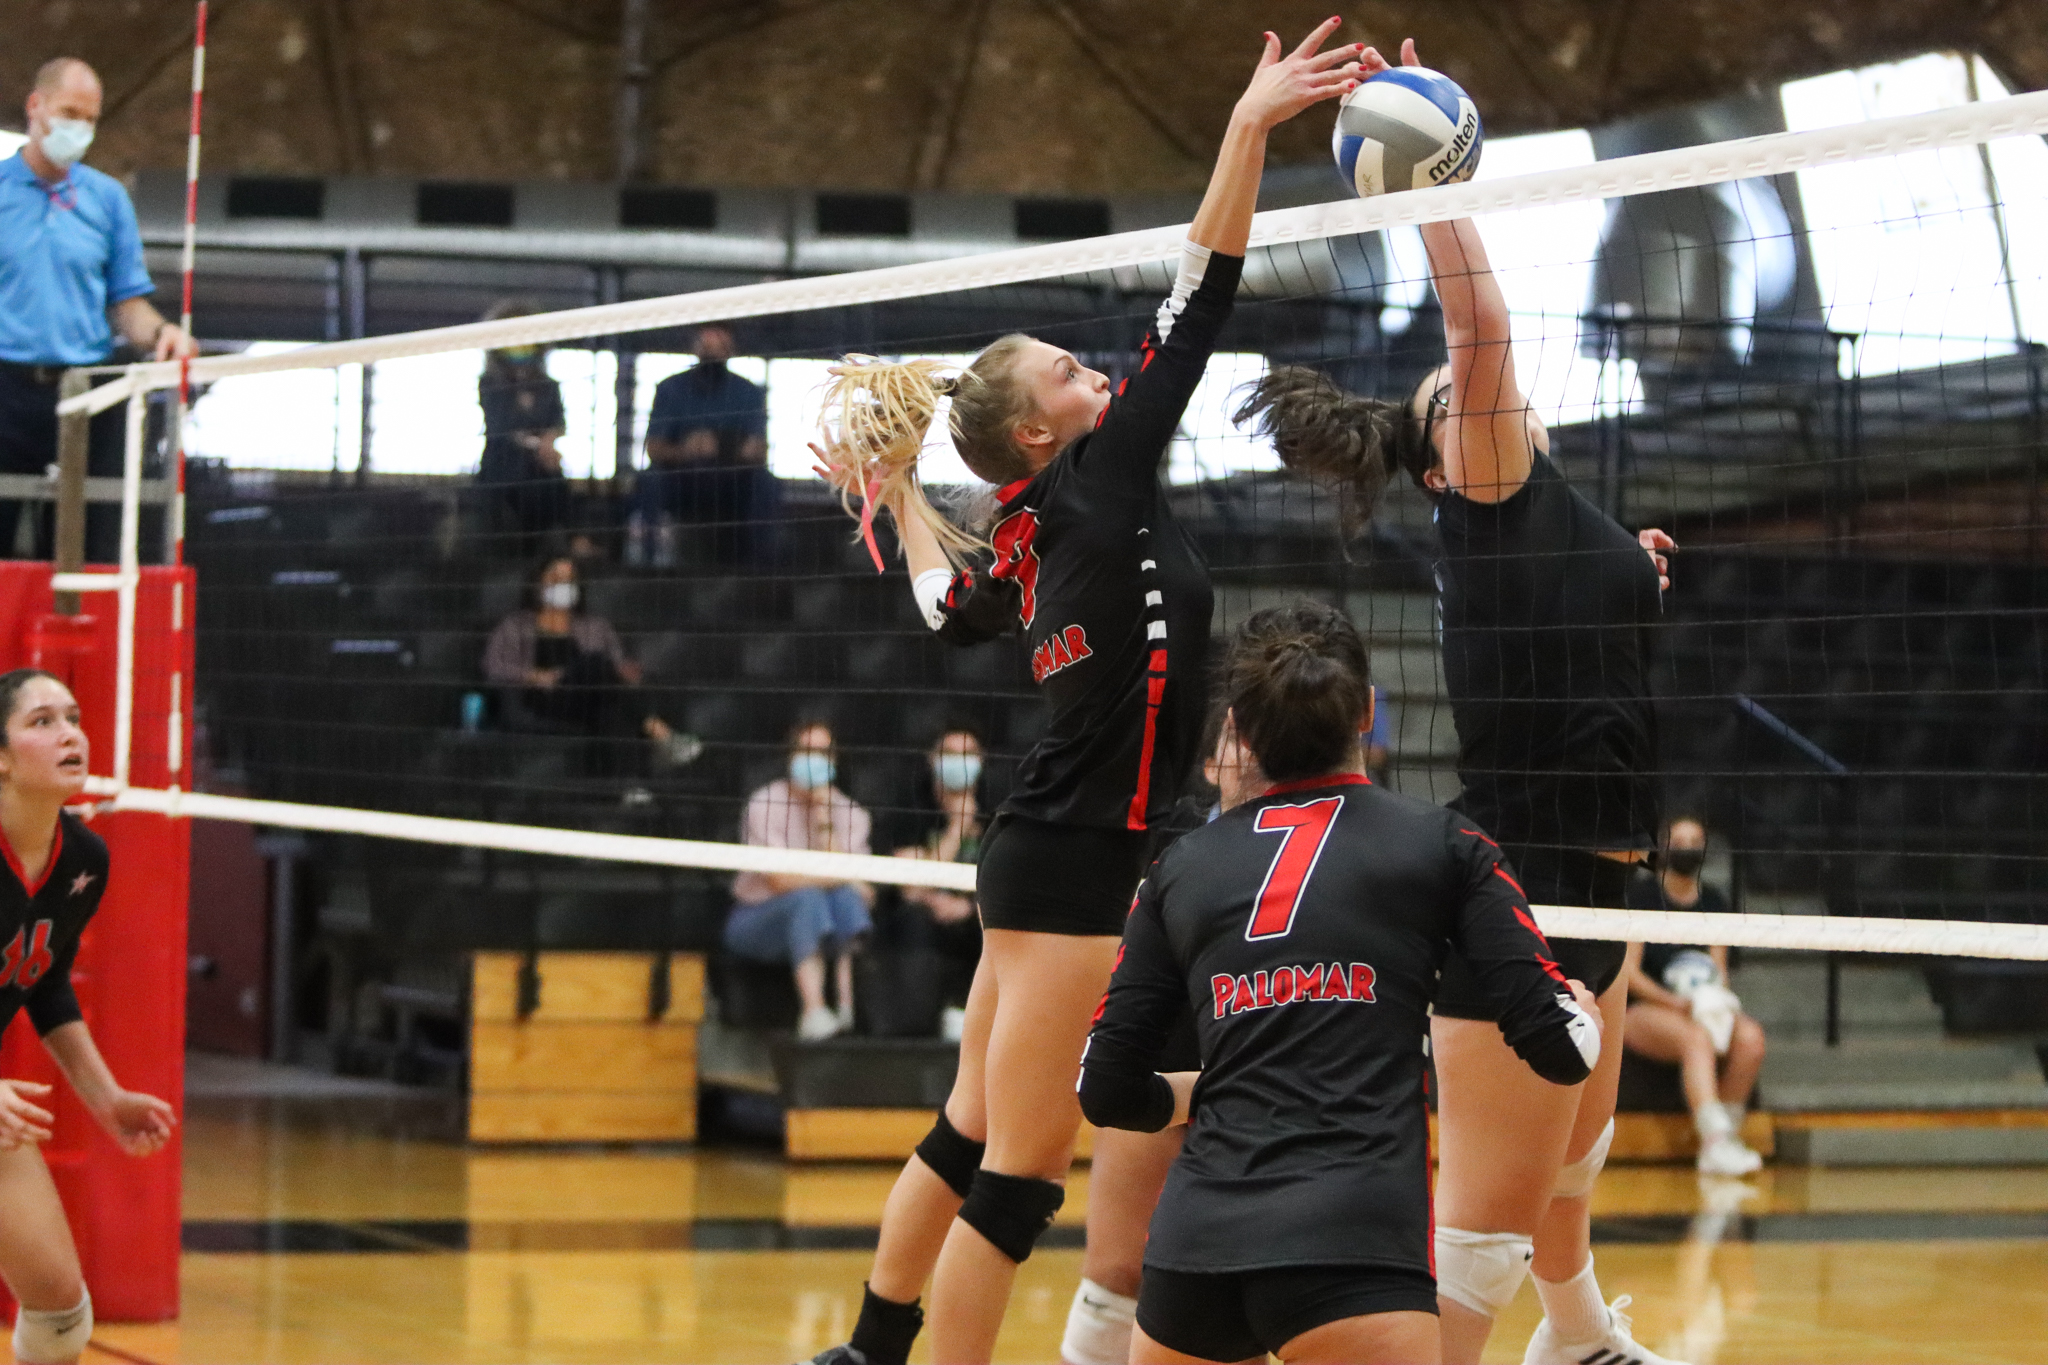 Courtney Hoffman finished the night with 10 kills against MiraCosta.